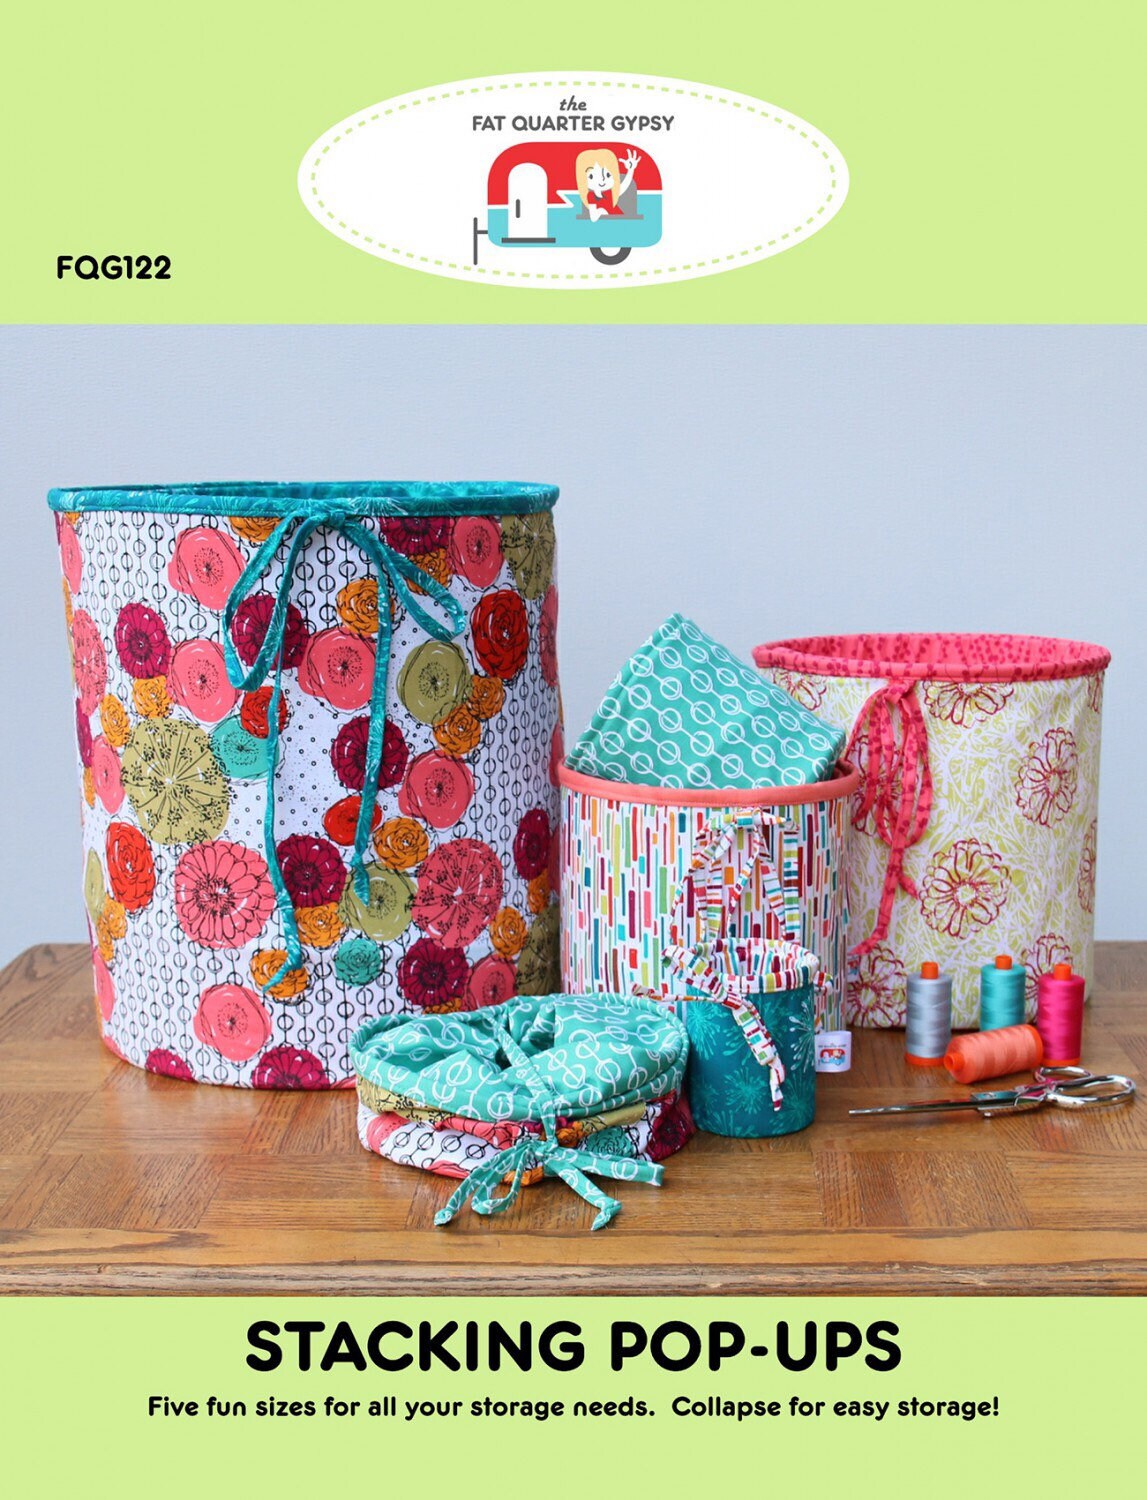 Stacking Pop-Ups Sewing Pattern - The Fat Quarter Gypsy